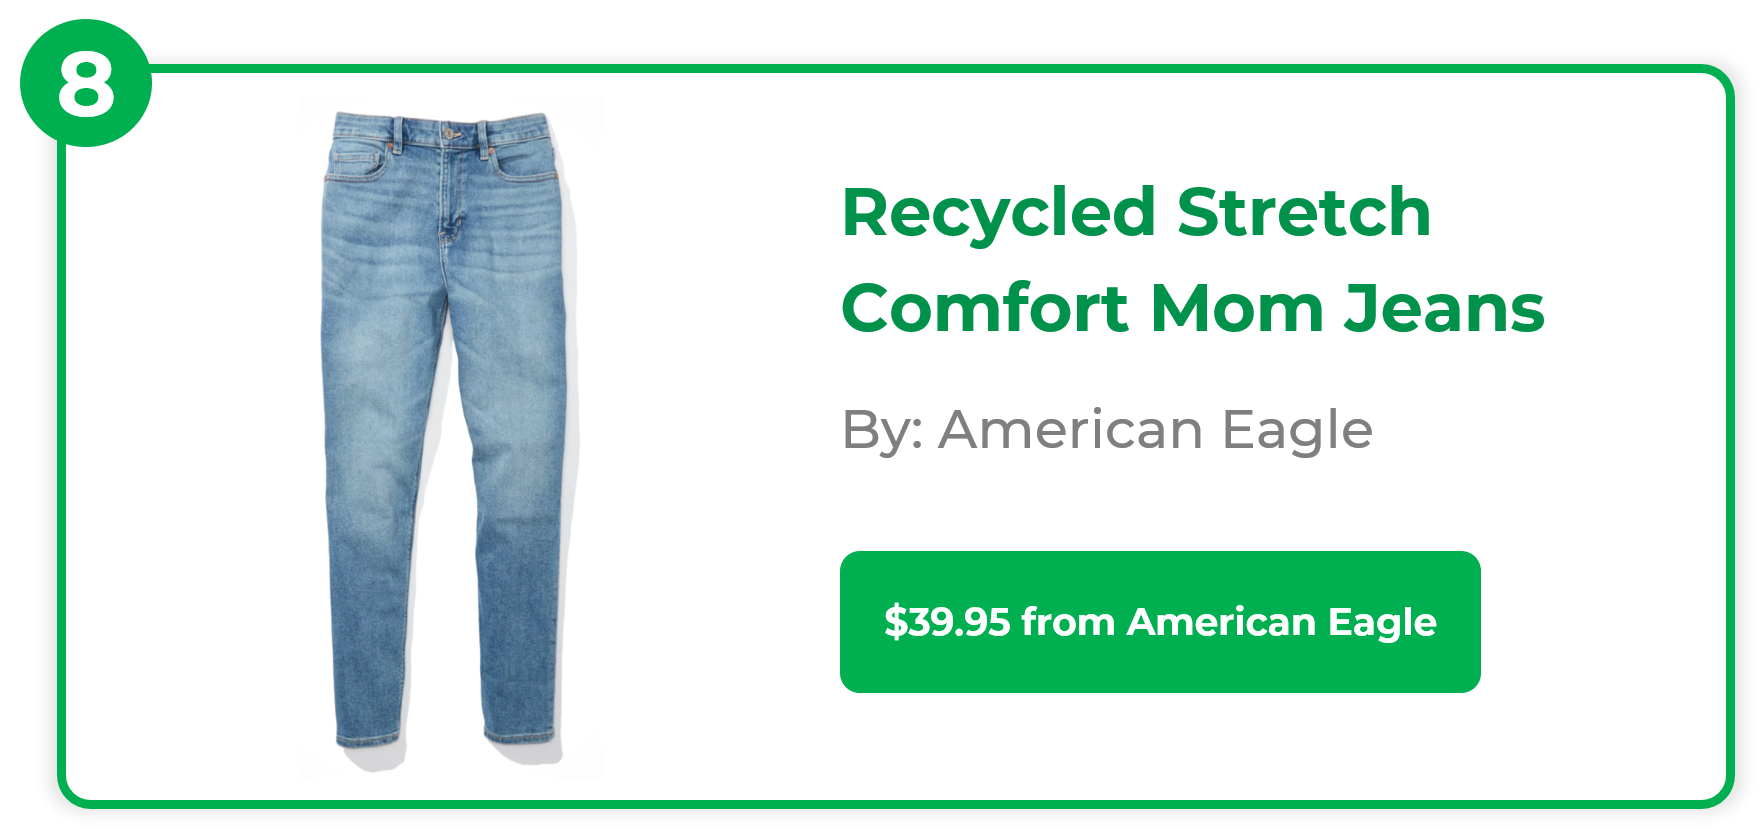 Recycled Stretch Comfort Mom Jeans - American Eagle